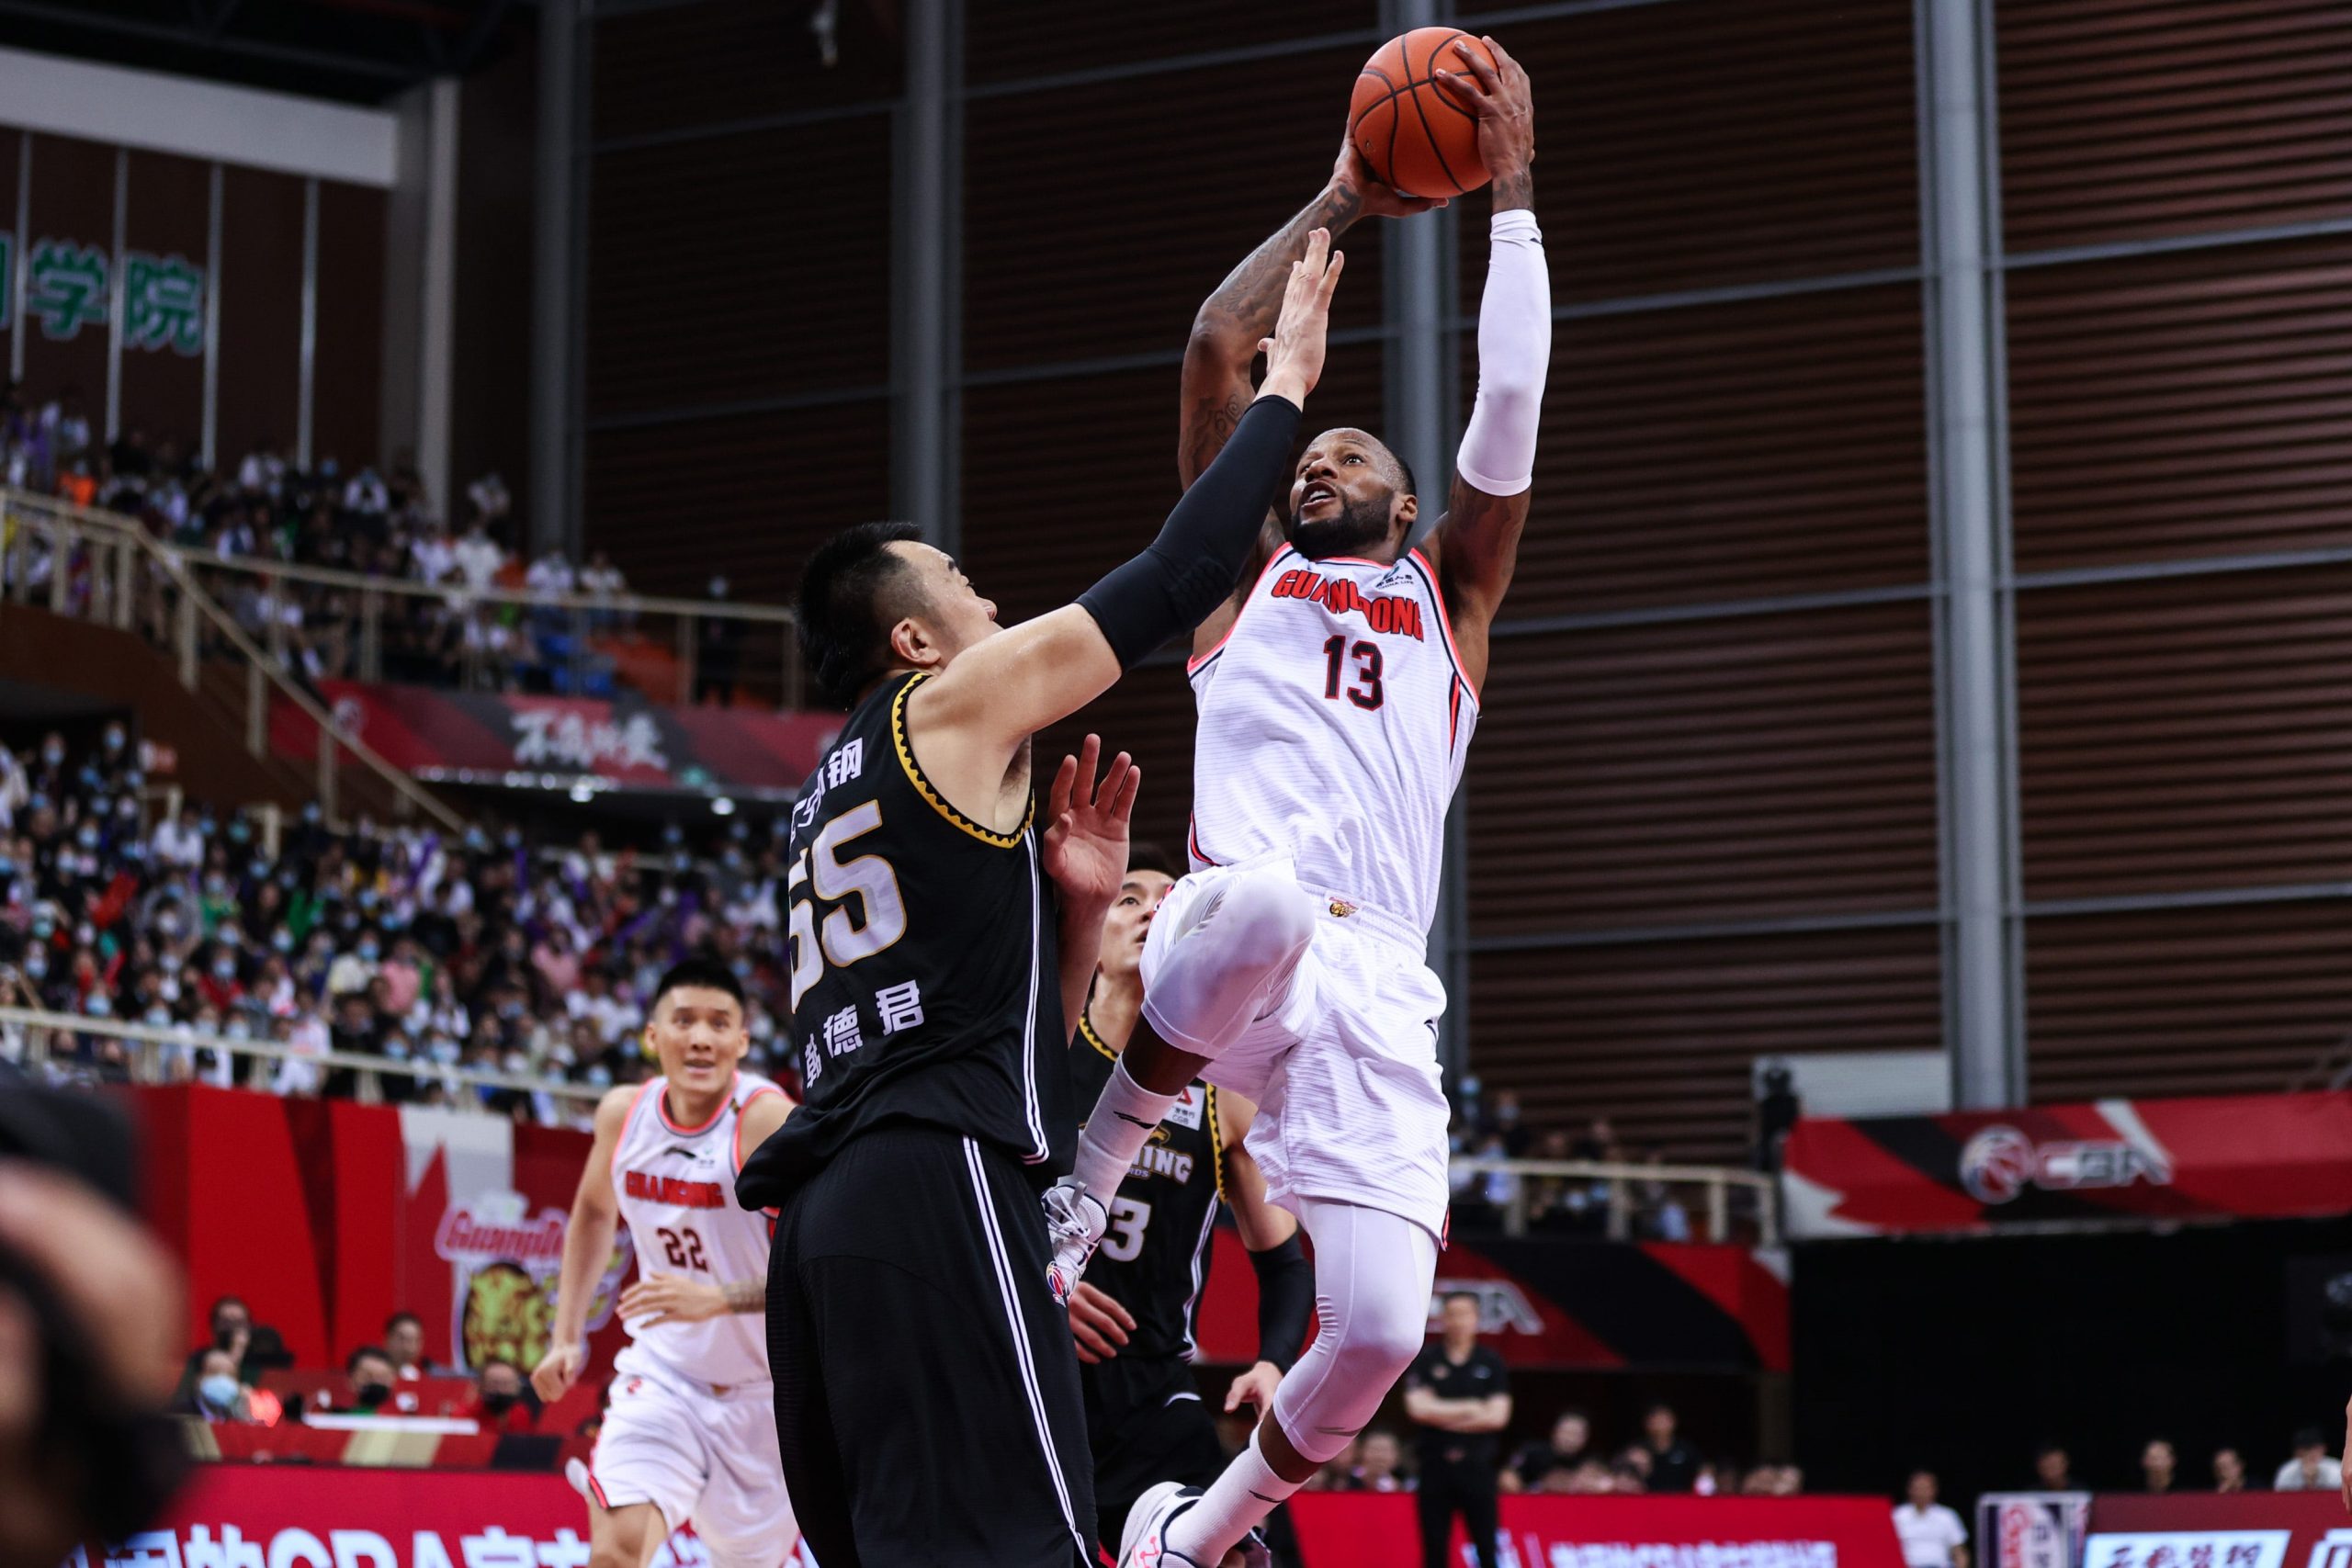 Sonny Weems leaps into the air for a shot as his opponent attempts to guard him.